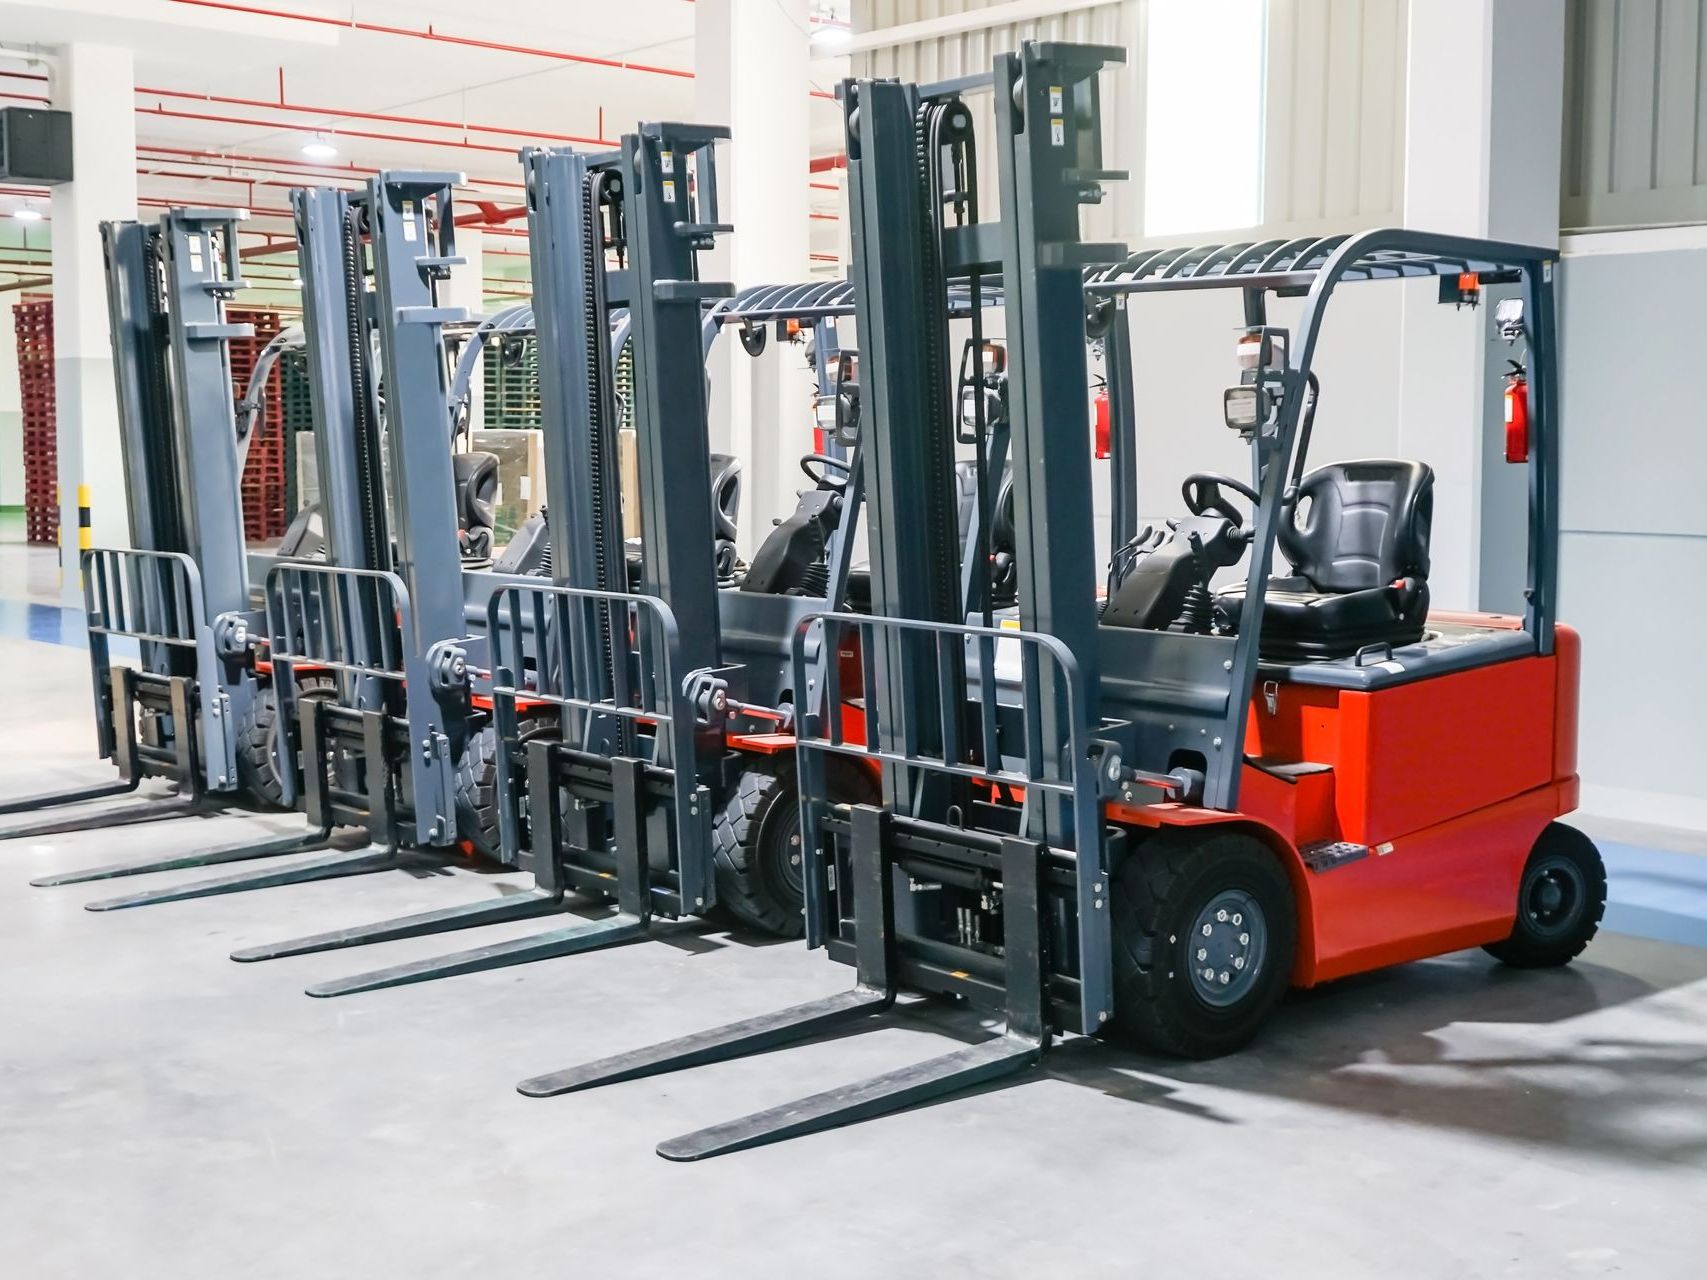 a row of forklifts are parked in a warehouse .